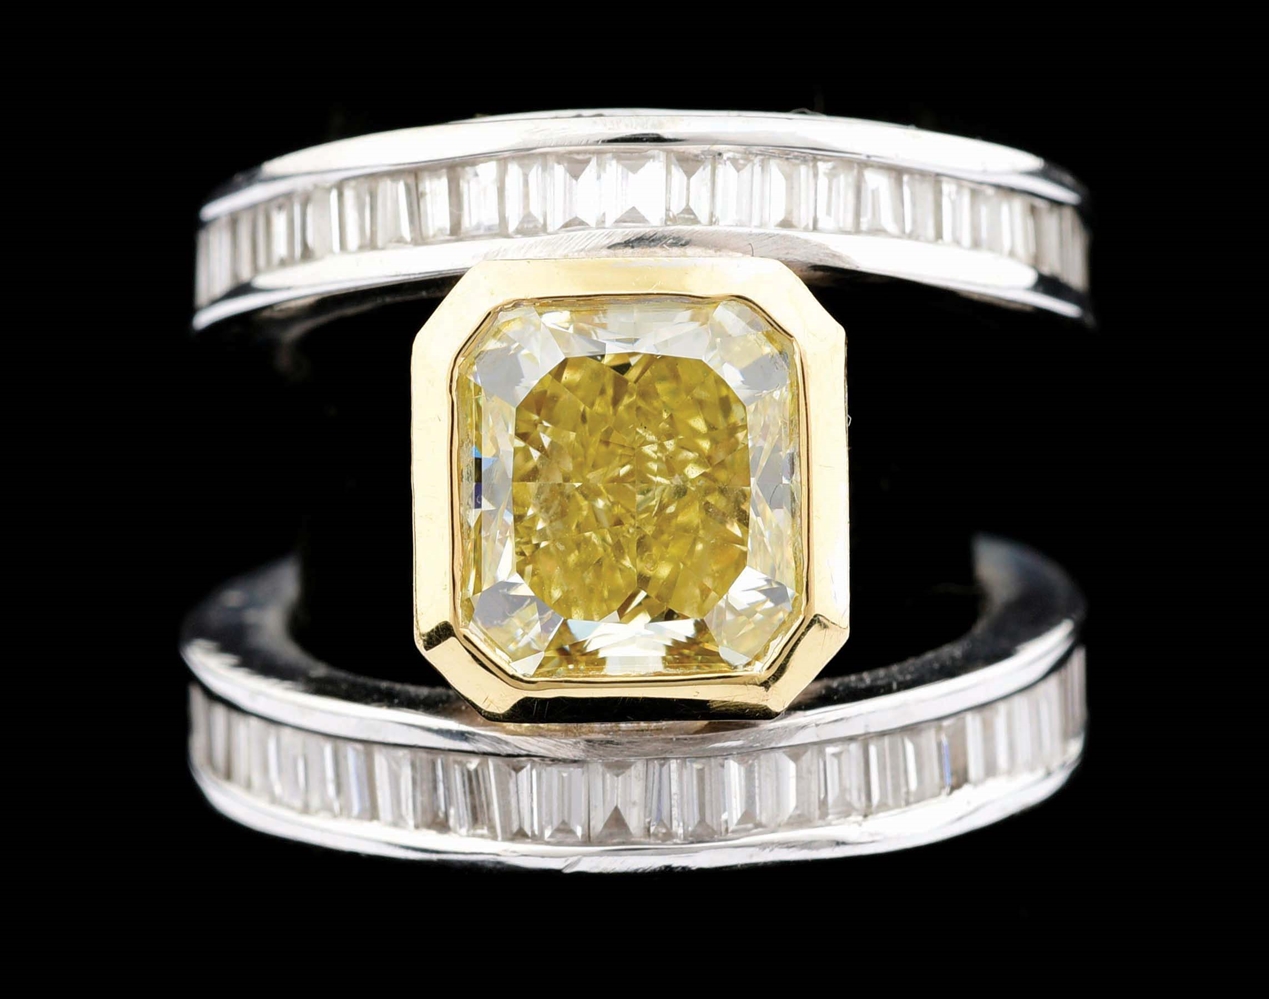 18K WHITE GOLD 4CT FANCY YELLOW DIAMOND RING WITH GIA REPORT AND APPRAISAL.